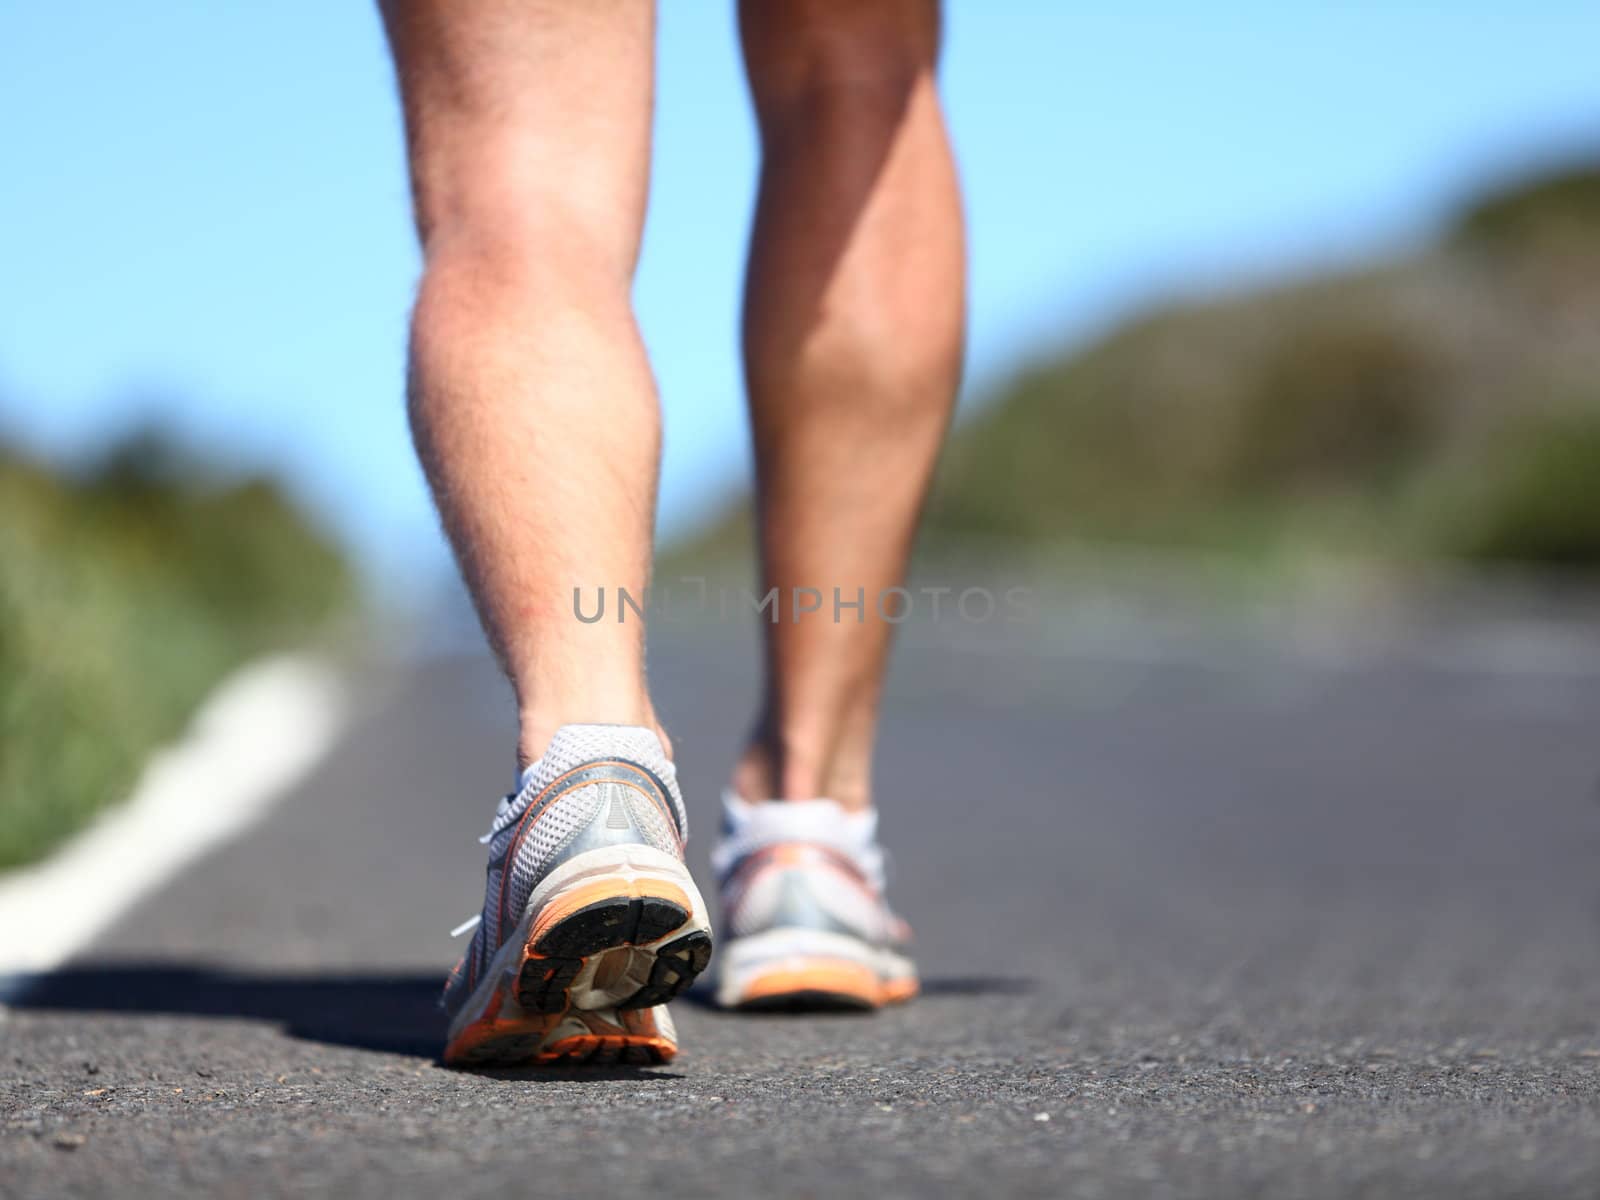 Jogging man. Running shoes and legs of male runner outside on road.